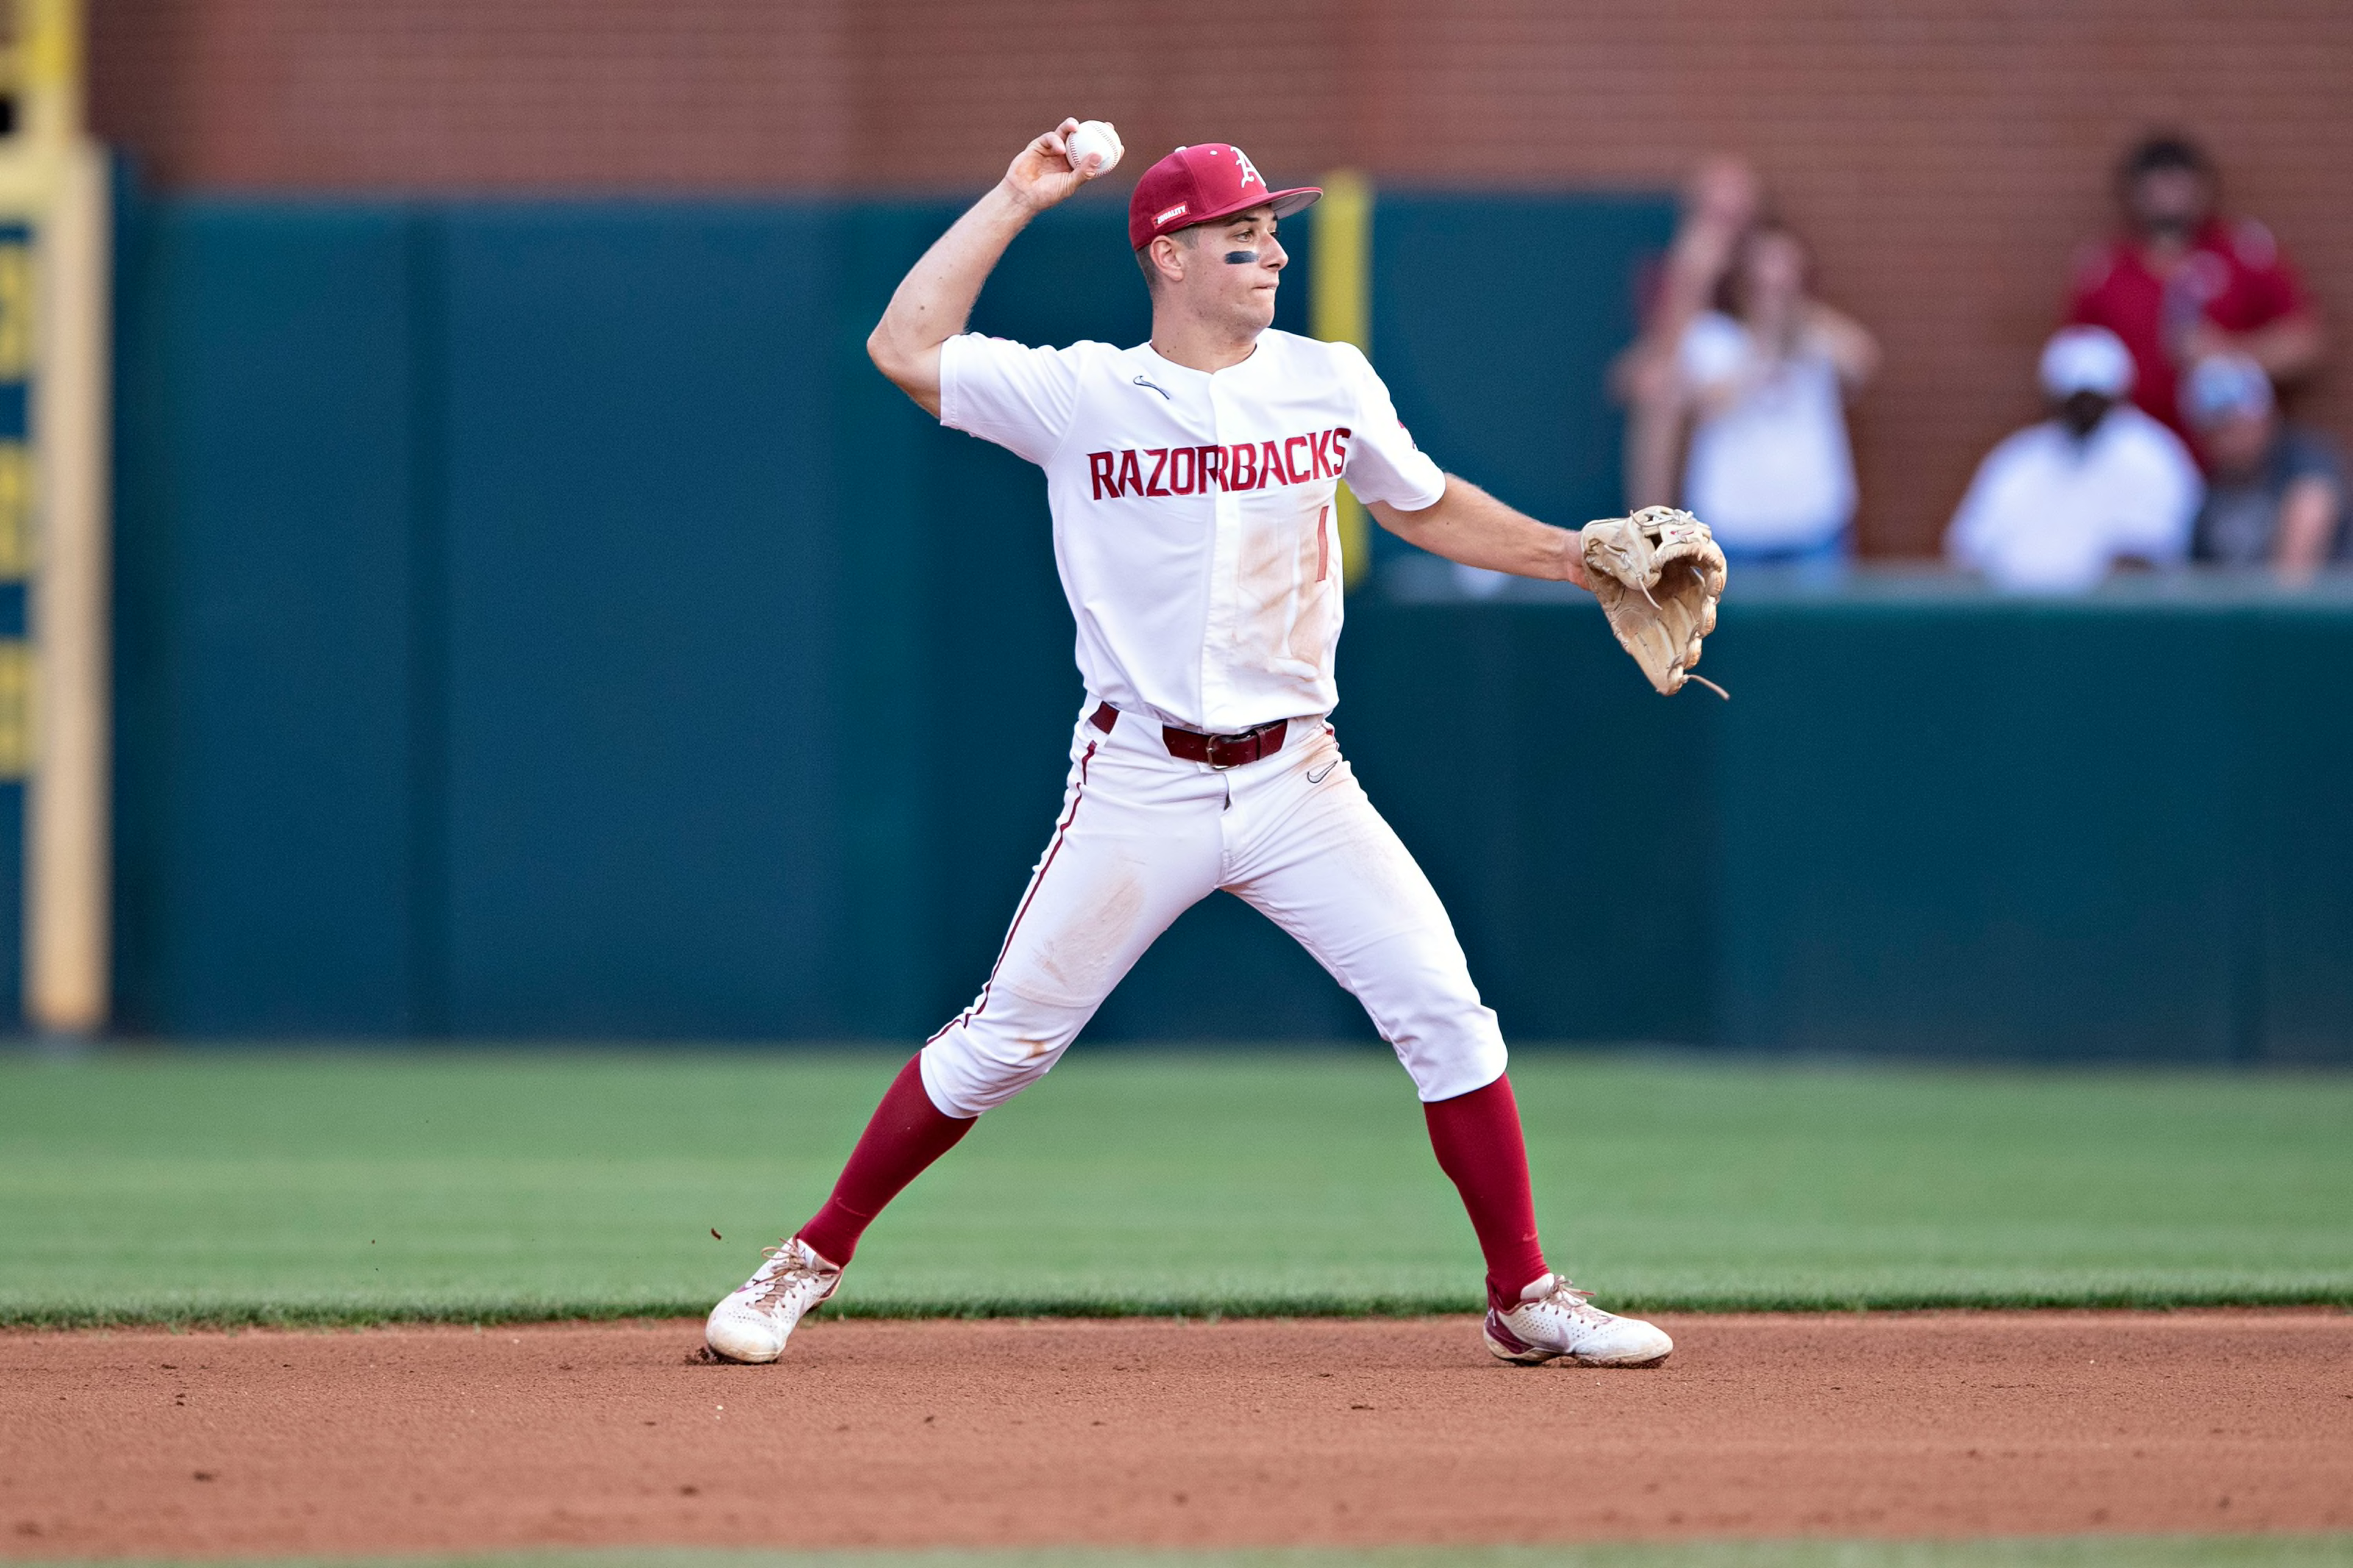 Arkansas Baseball: 5 newcomers we can't wait to see suit up for